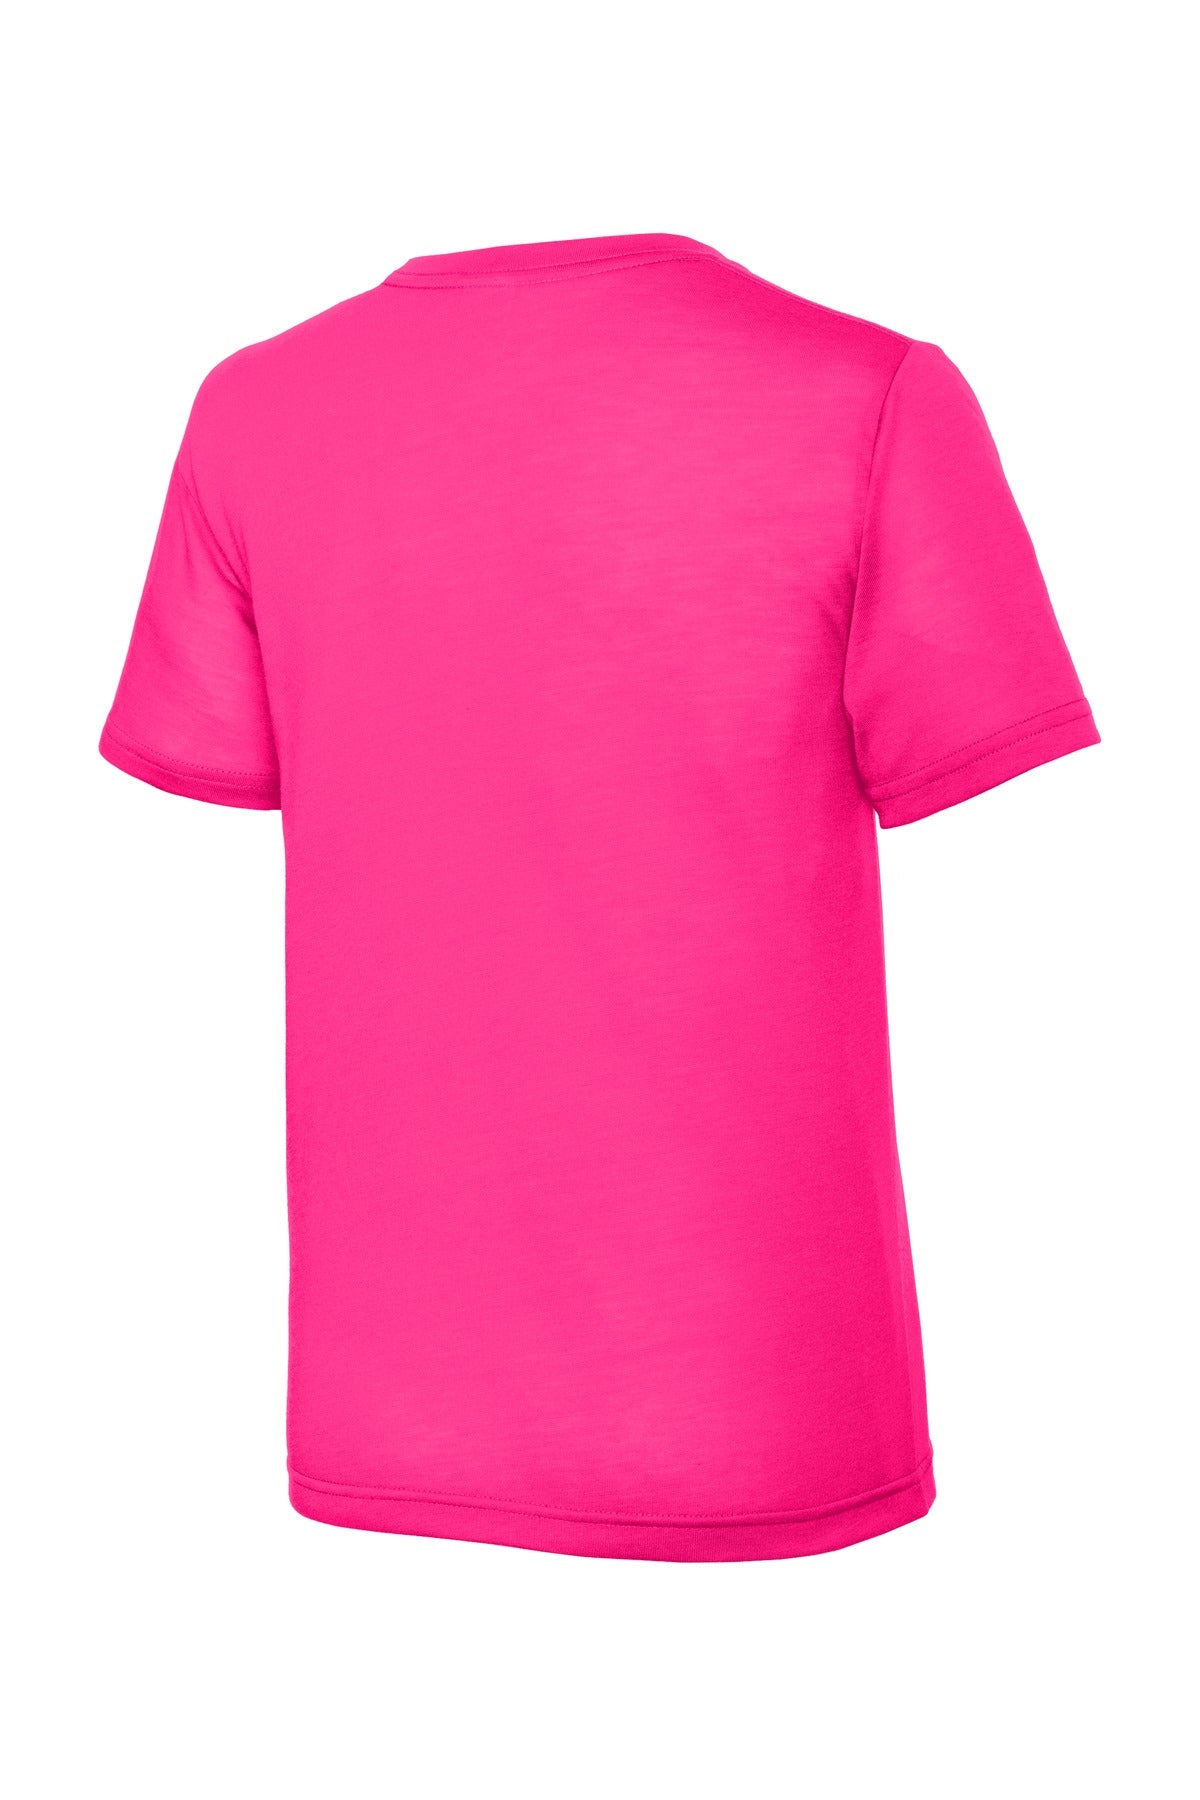 Sport-Tek Youth PosiCharge Competitor™ Cotton Touch™ Tee. YST450